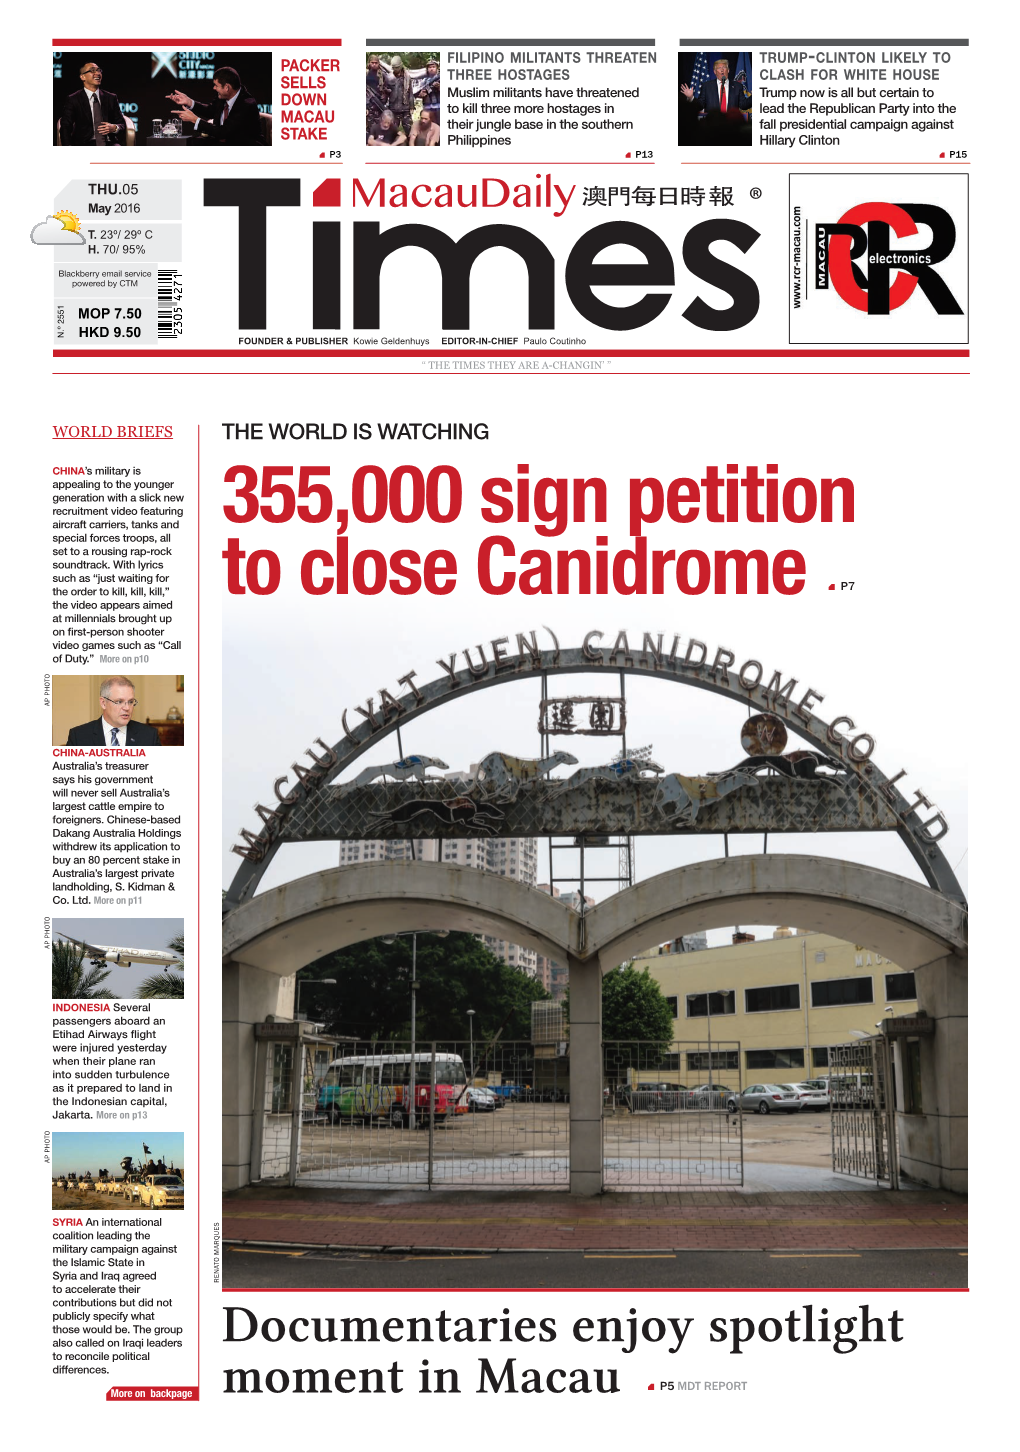 355,000 Sign Petition to Close Canidrome